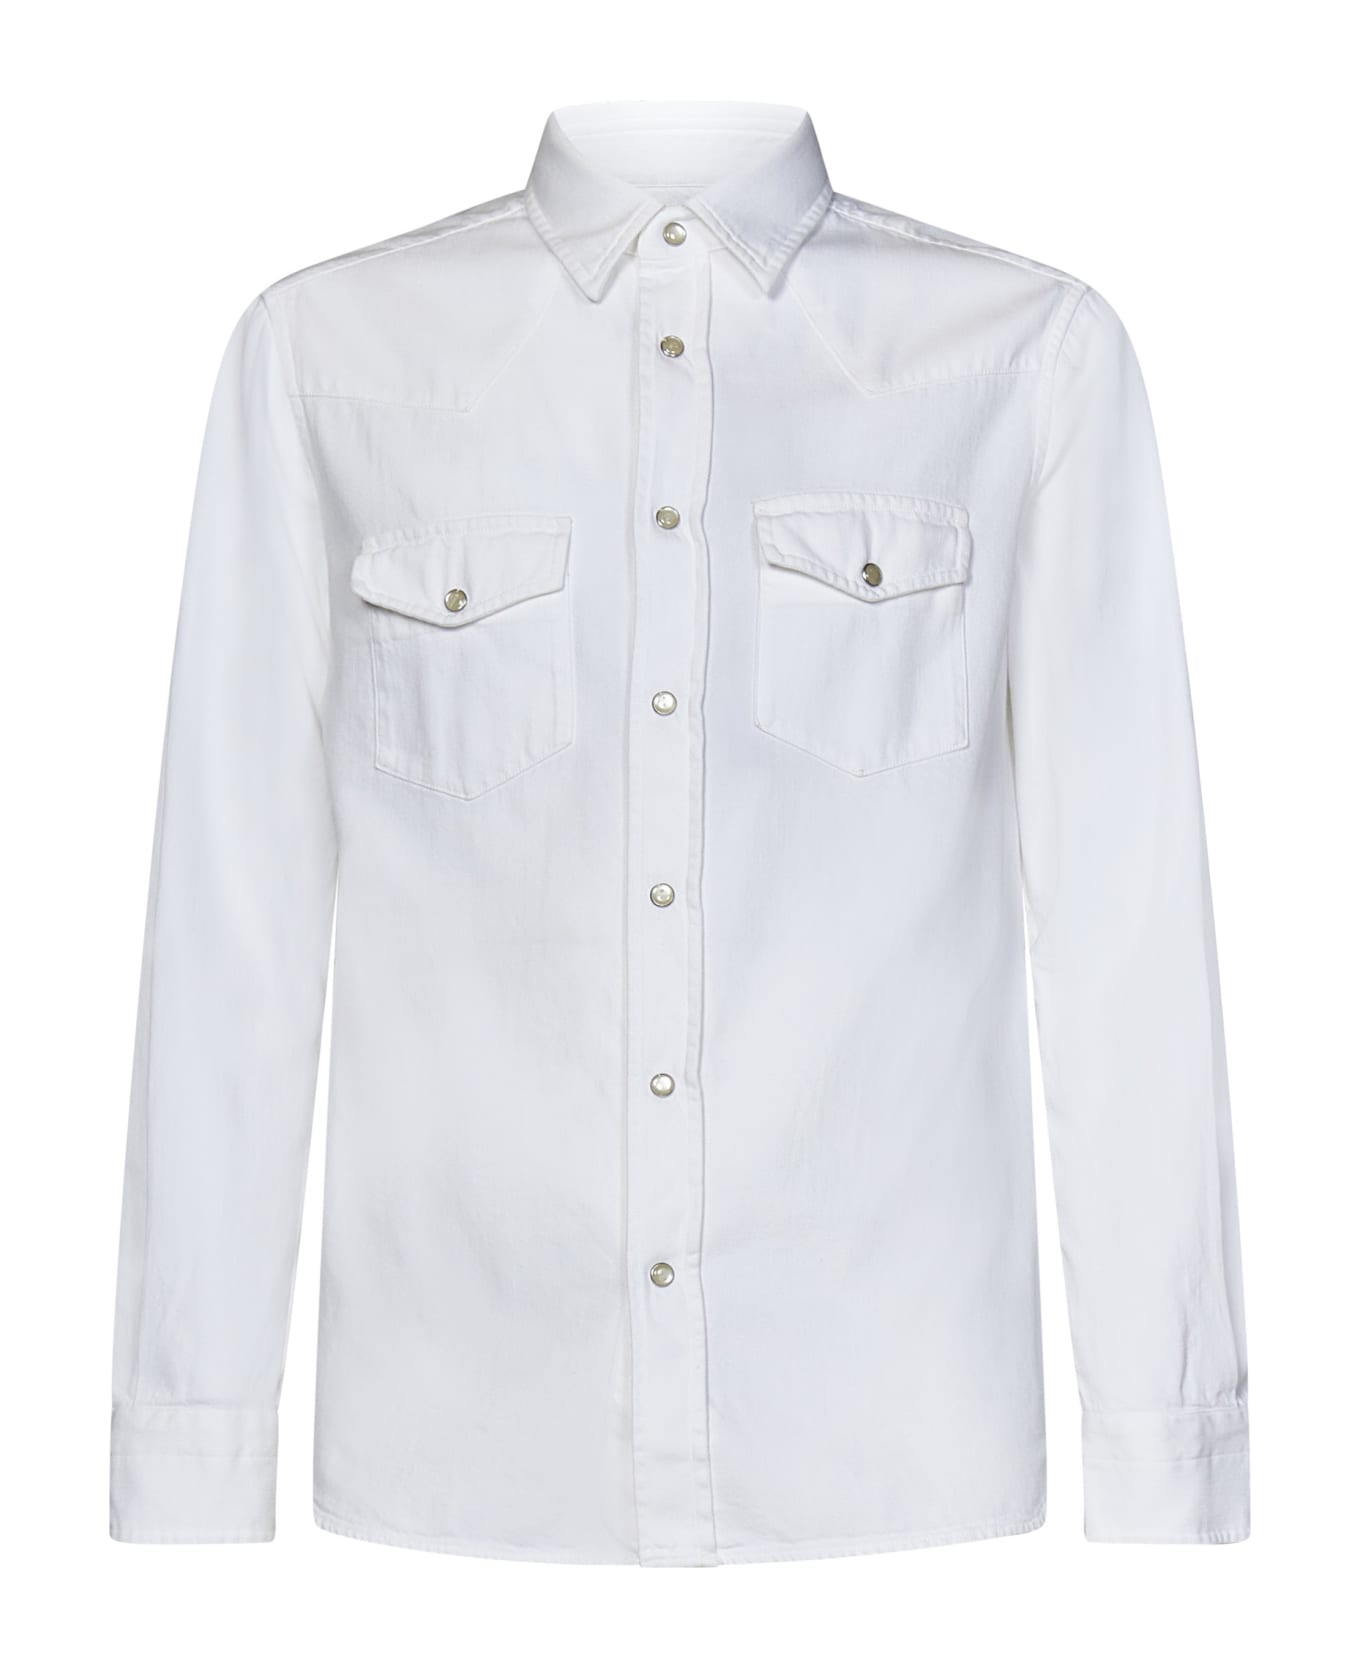 Tom Ford Patch Pocket Long-sleeved Shirt - White